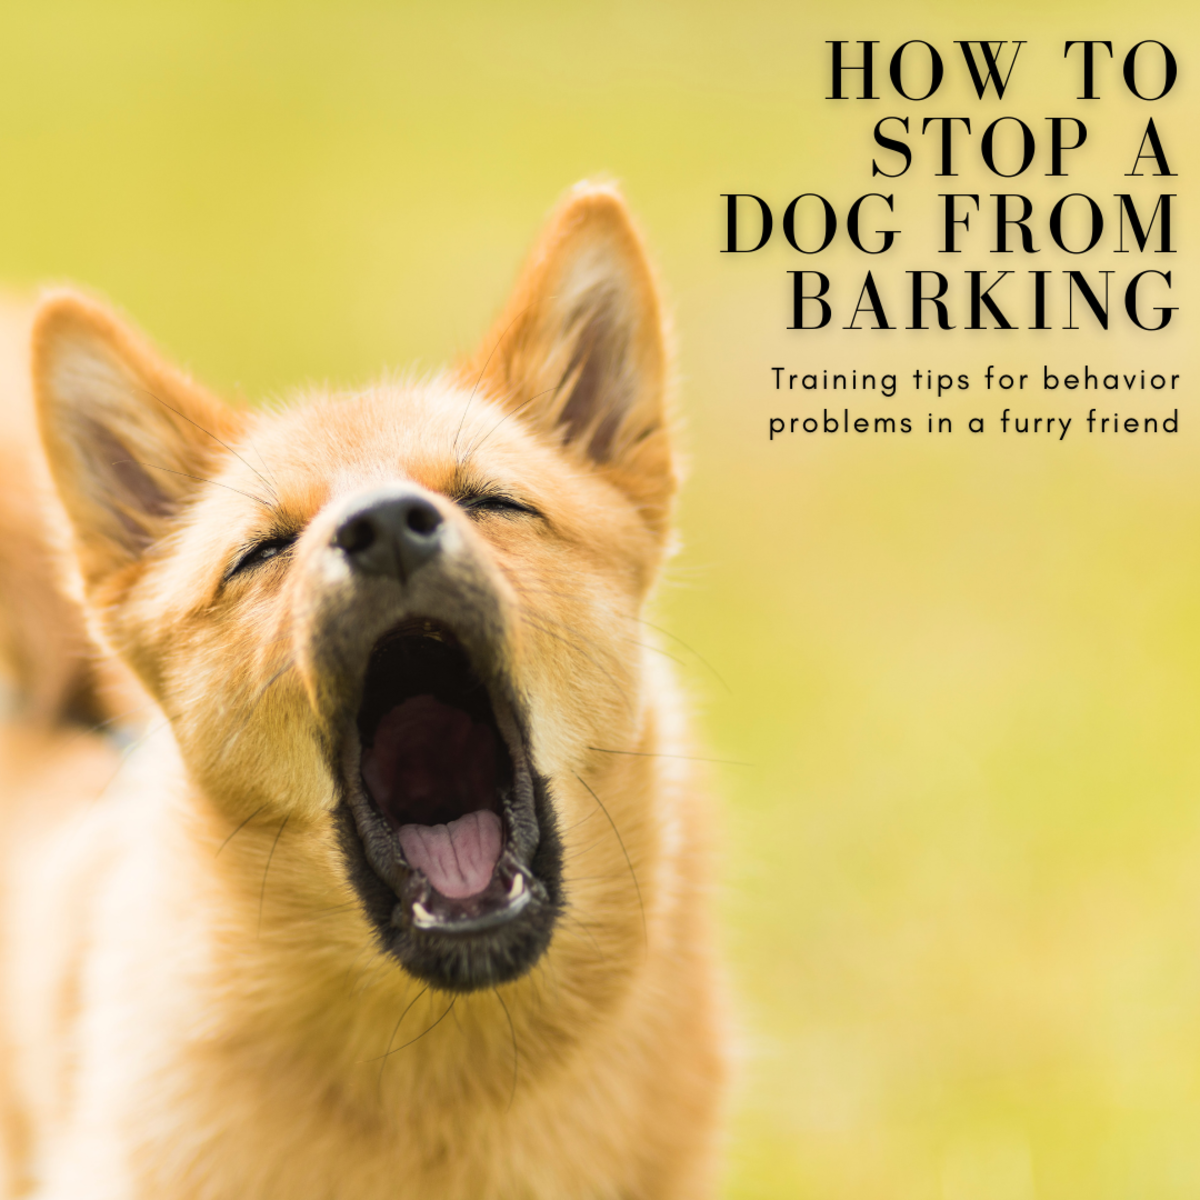 How to Stop a Dog From Barking: Dog Training for Behavior Problems